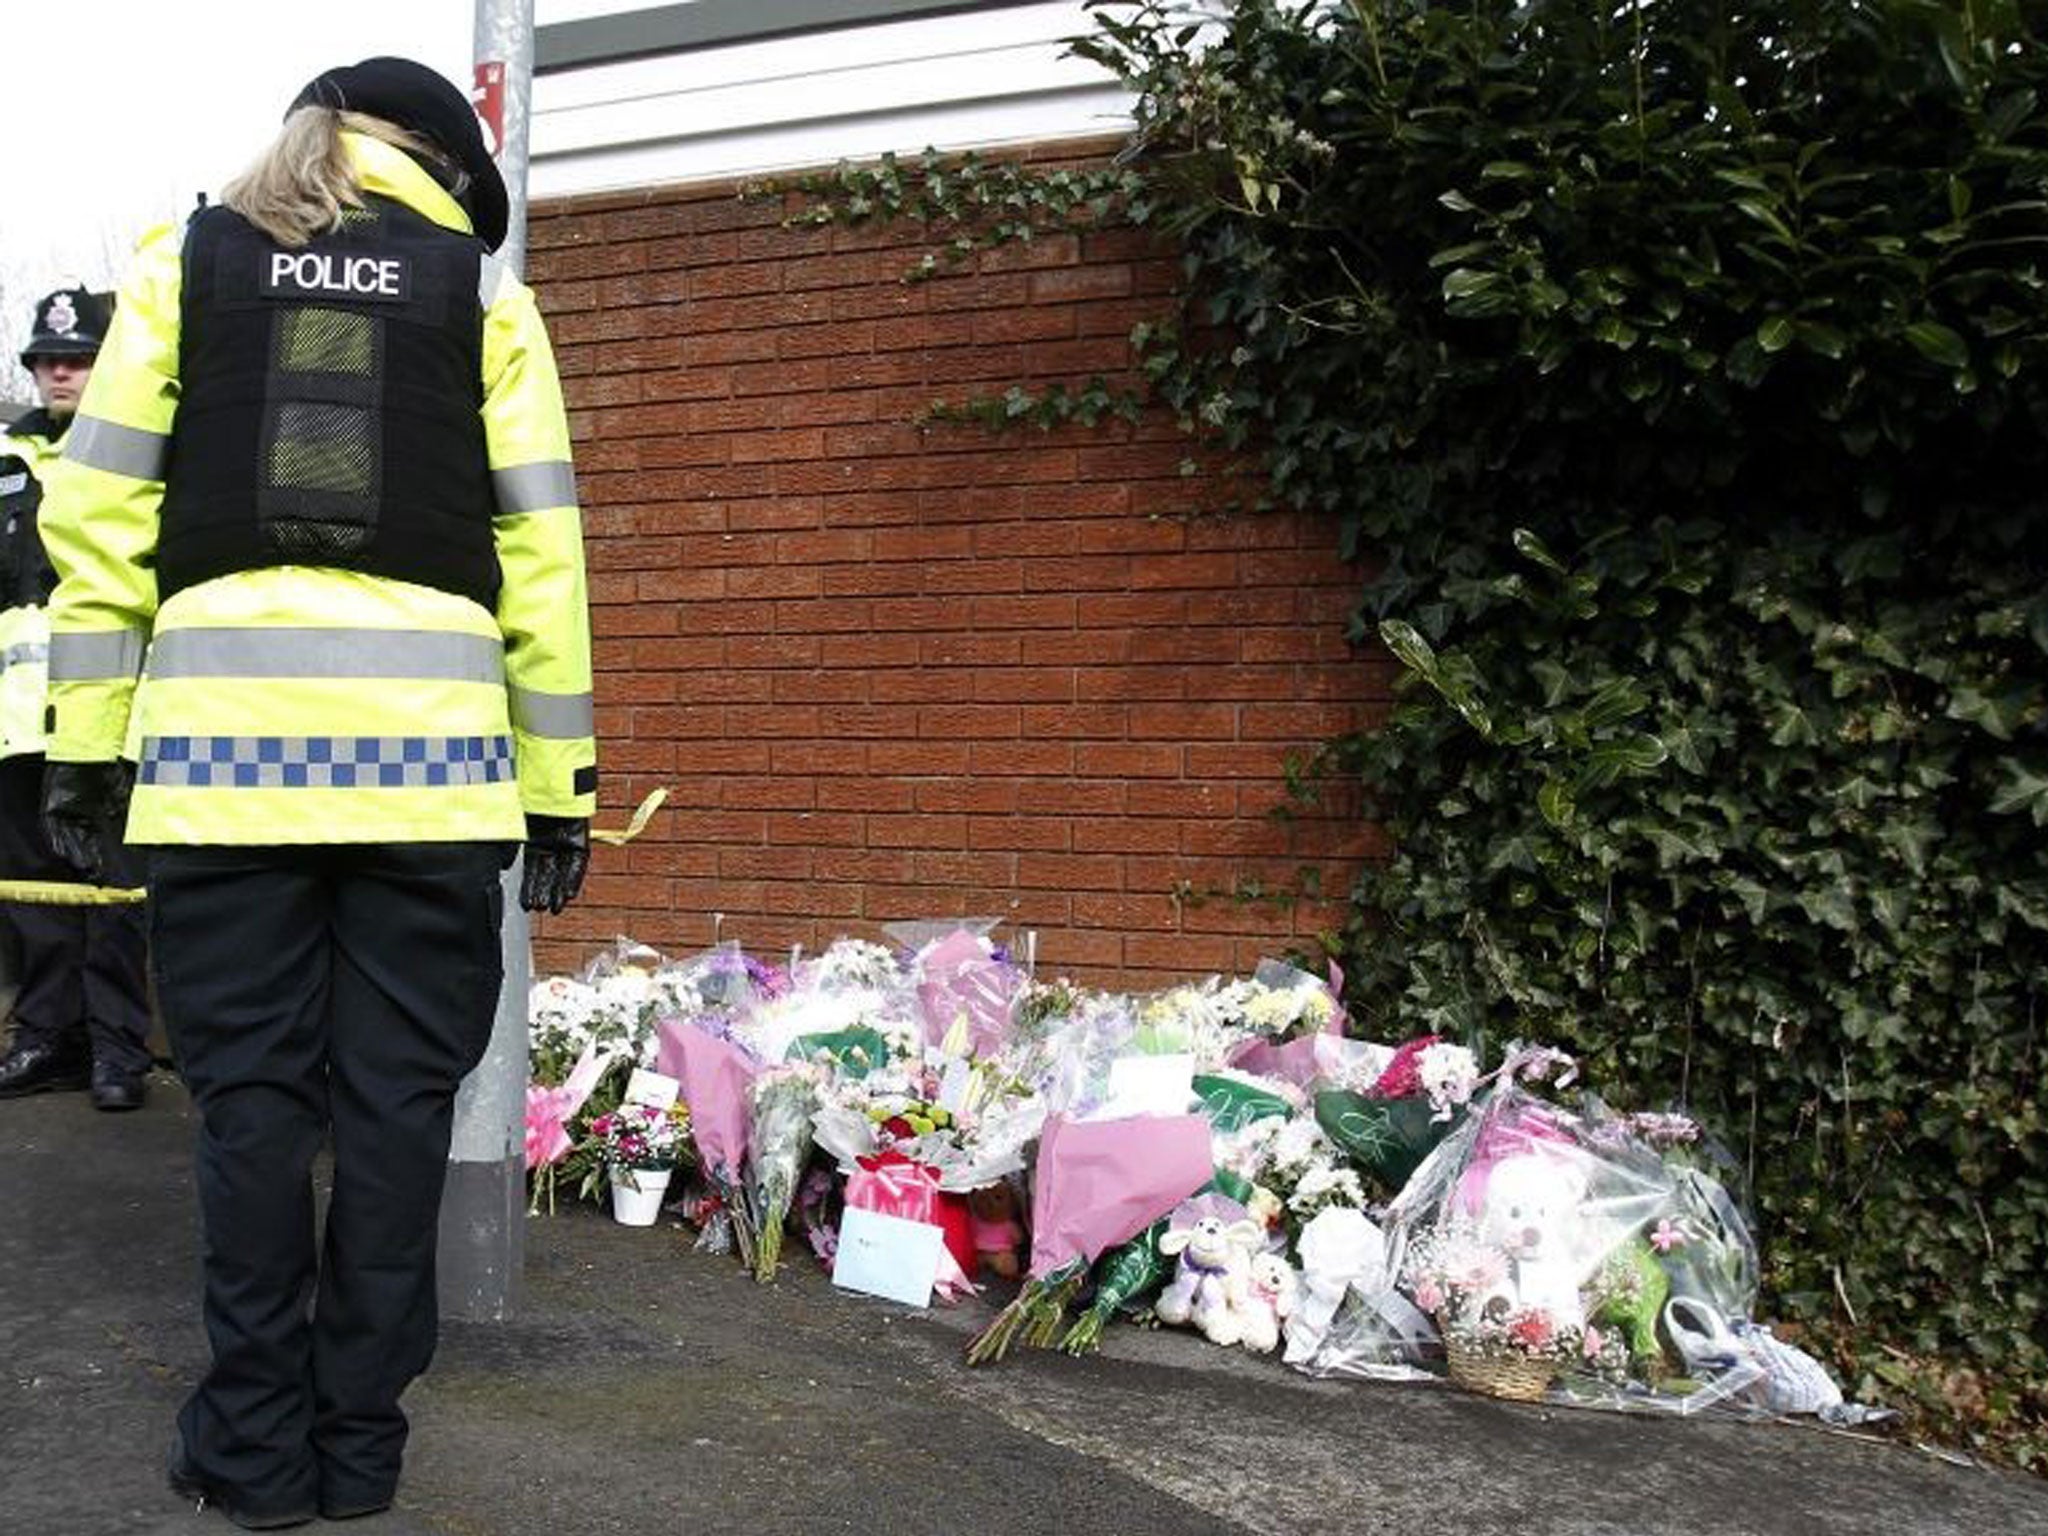 A policewoman stands near the scene where a 14 year old Jade Anderson was found dead believed to have been killed by a pack of dogs in Atherton, Greater Manchester